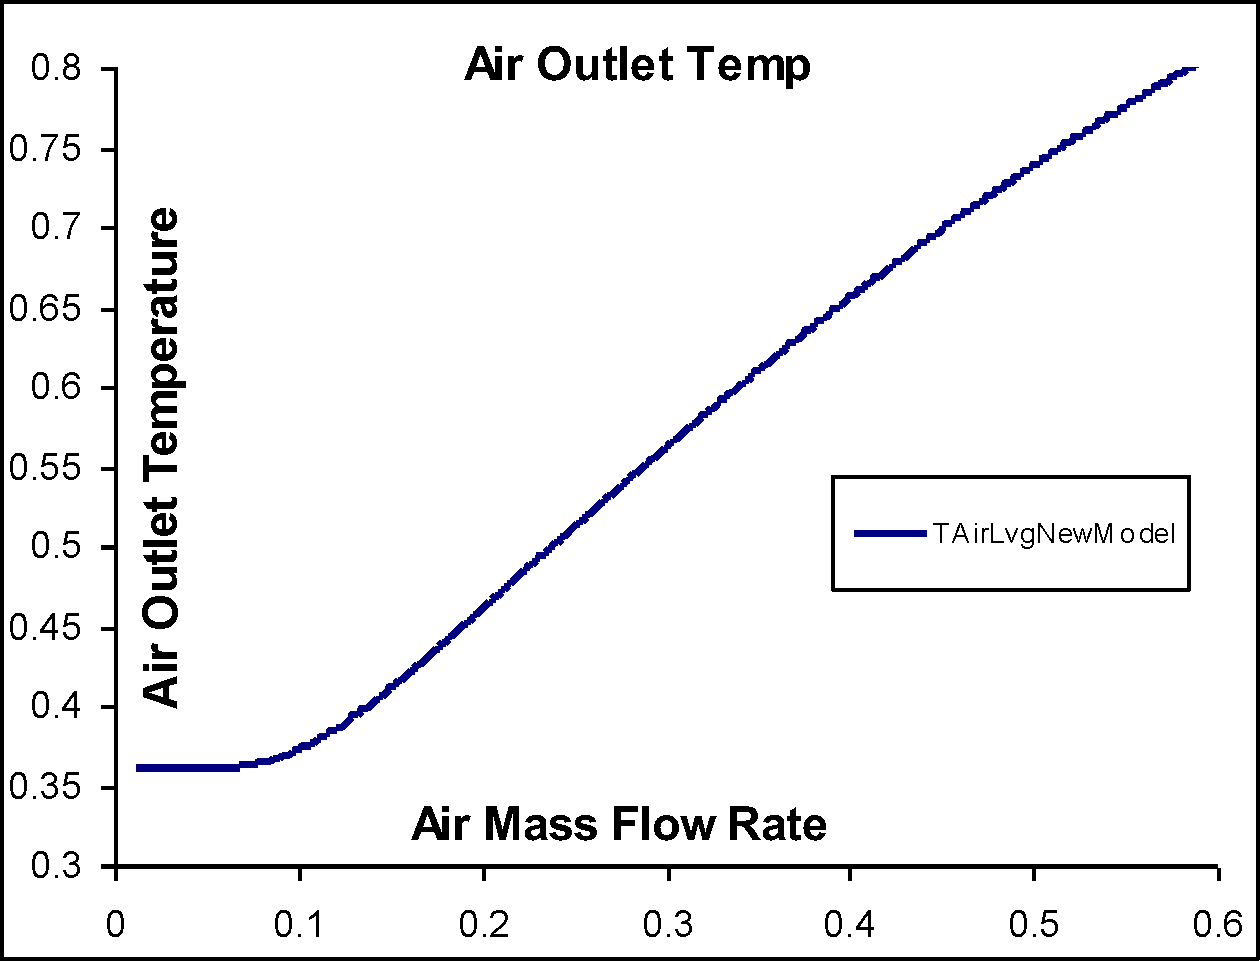 Air Outlet Temperature Vs. Air Mass Flow Rate [fig:air-outlet-temperature-vs-air-mass-flow-rate]